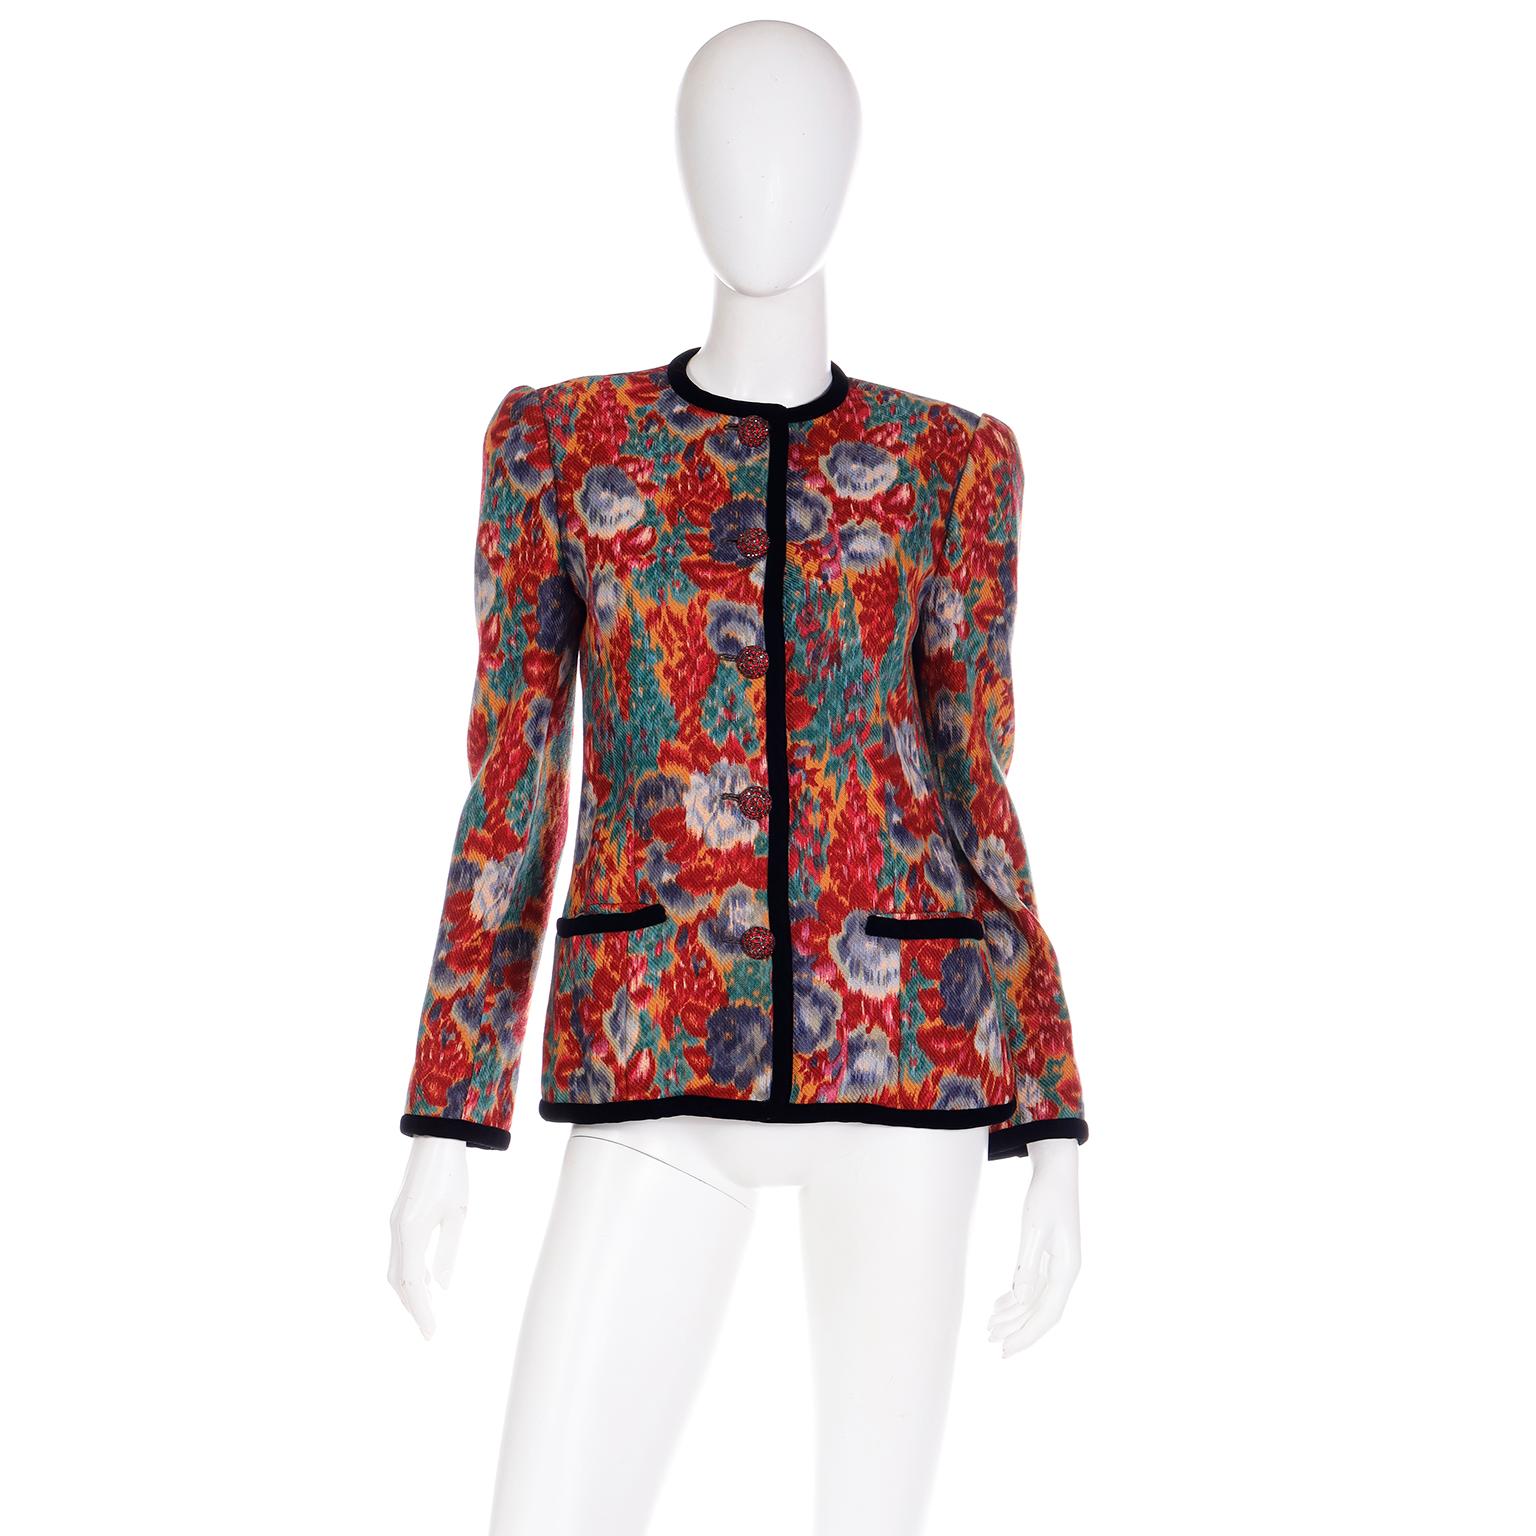 This ultra luxe vintage Oscar de la Renta jacket is a great testament to the designer's talent and attention to detail. We love vintage Oscar de la Renta pieces and after you have seen one in person, you will understand why we say they were made to